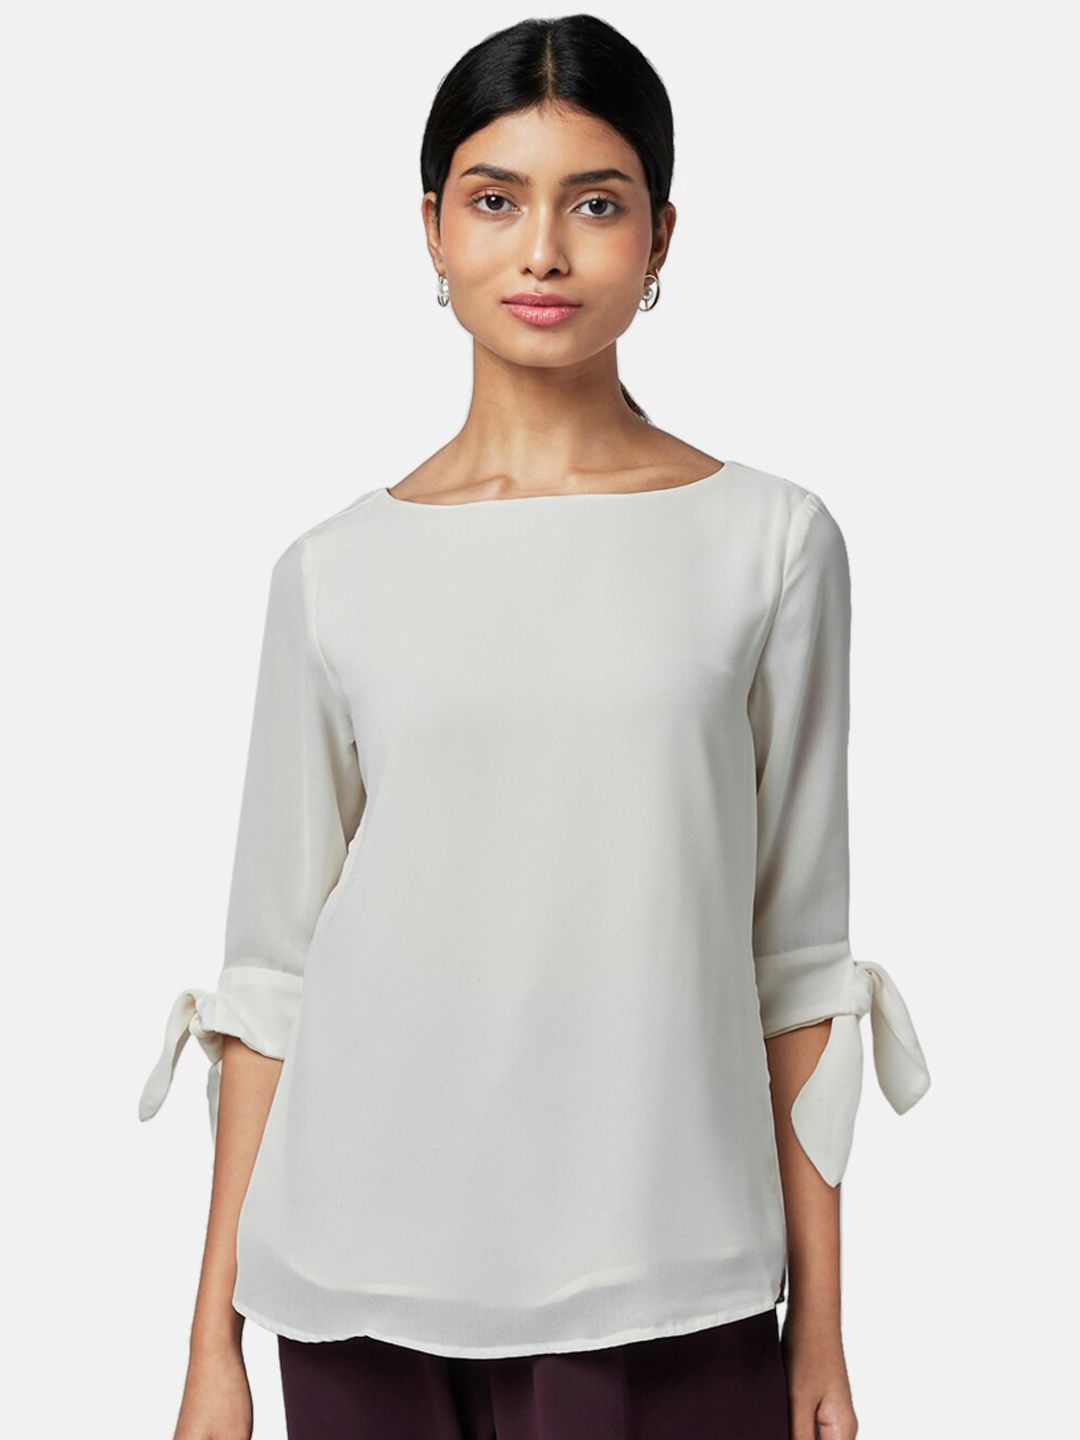 Annabelle by Pantaloons Women Off White Solid Top Price in India